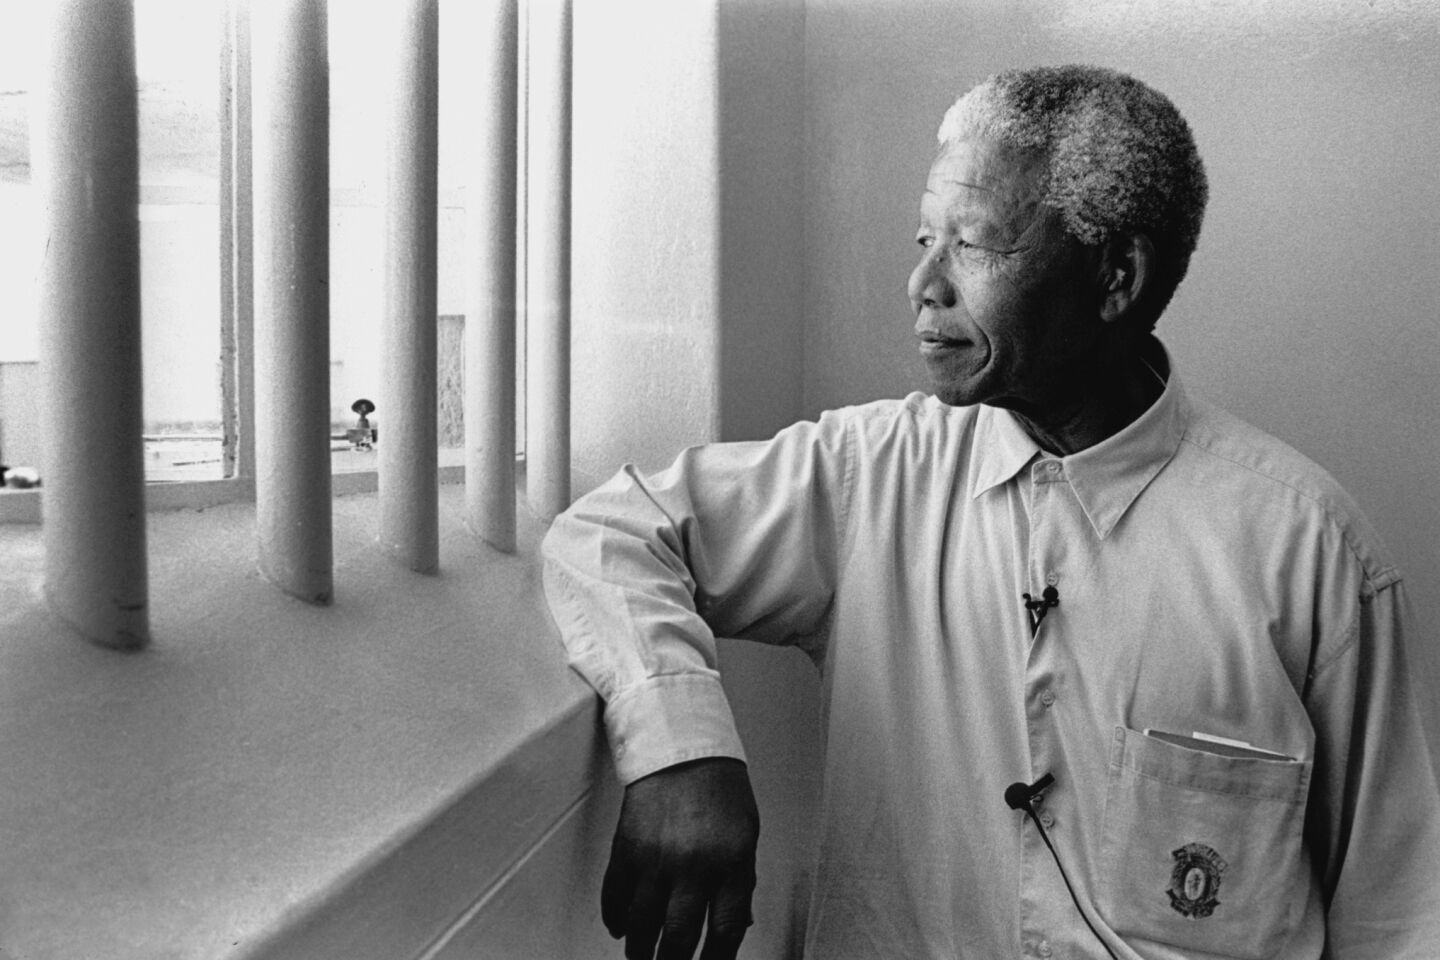 Jailed for 27 years by a white-minority government as a terrorist, he walked free as a septuagenarian to lead South Africa to its first multiracial democracy. He was 95.